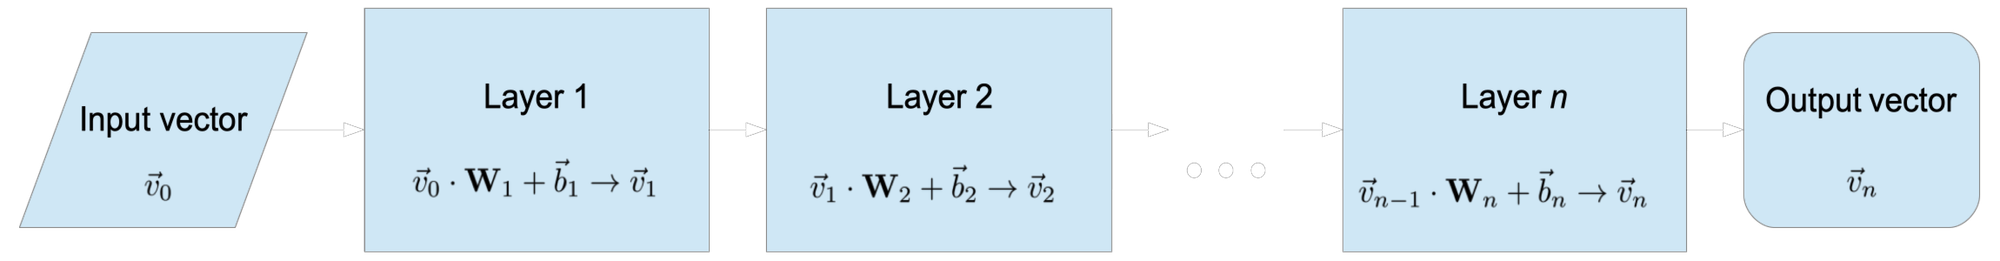 Diagram of a neural network showing signal flow from "Input vector" to "Output vector" across multiple layers